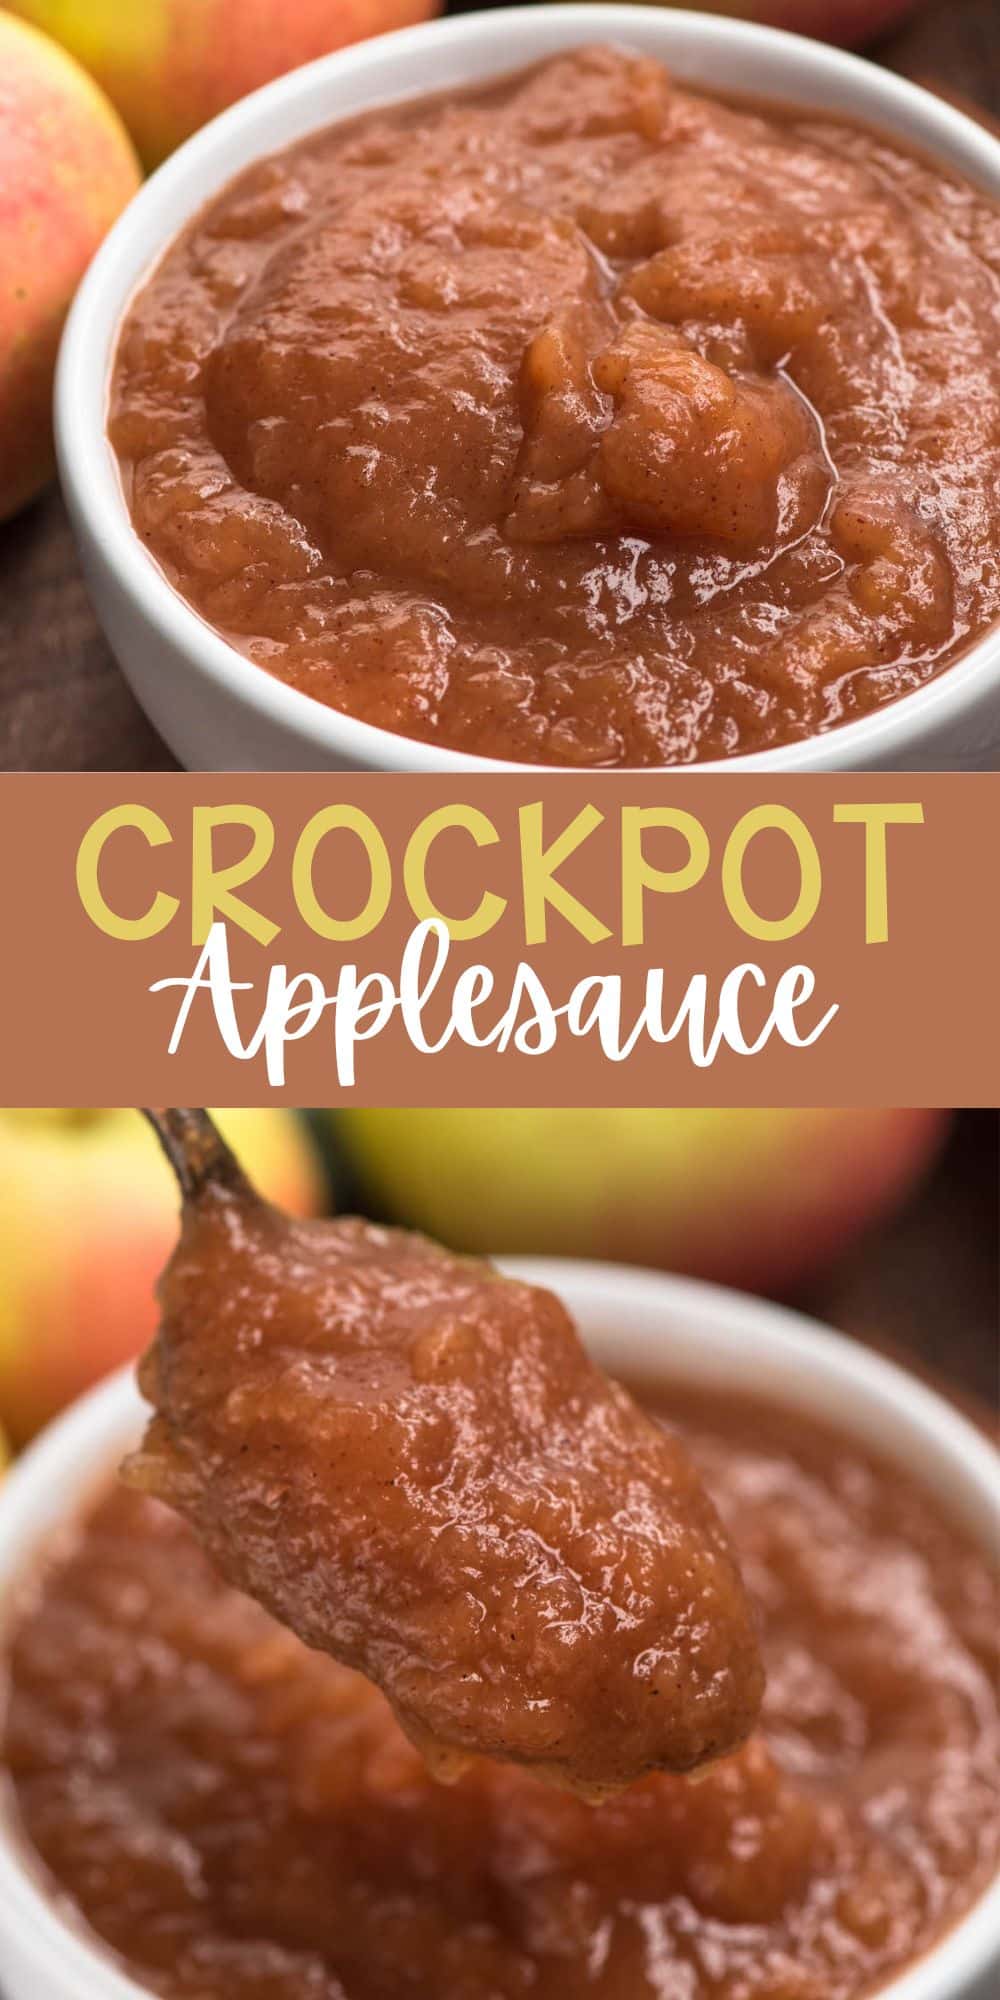 crockpot applesauce in a white bowl with words on the image.